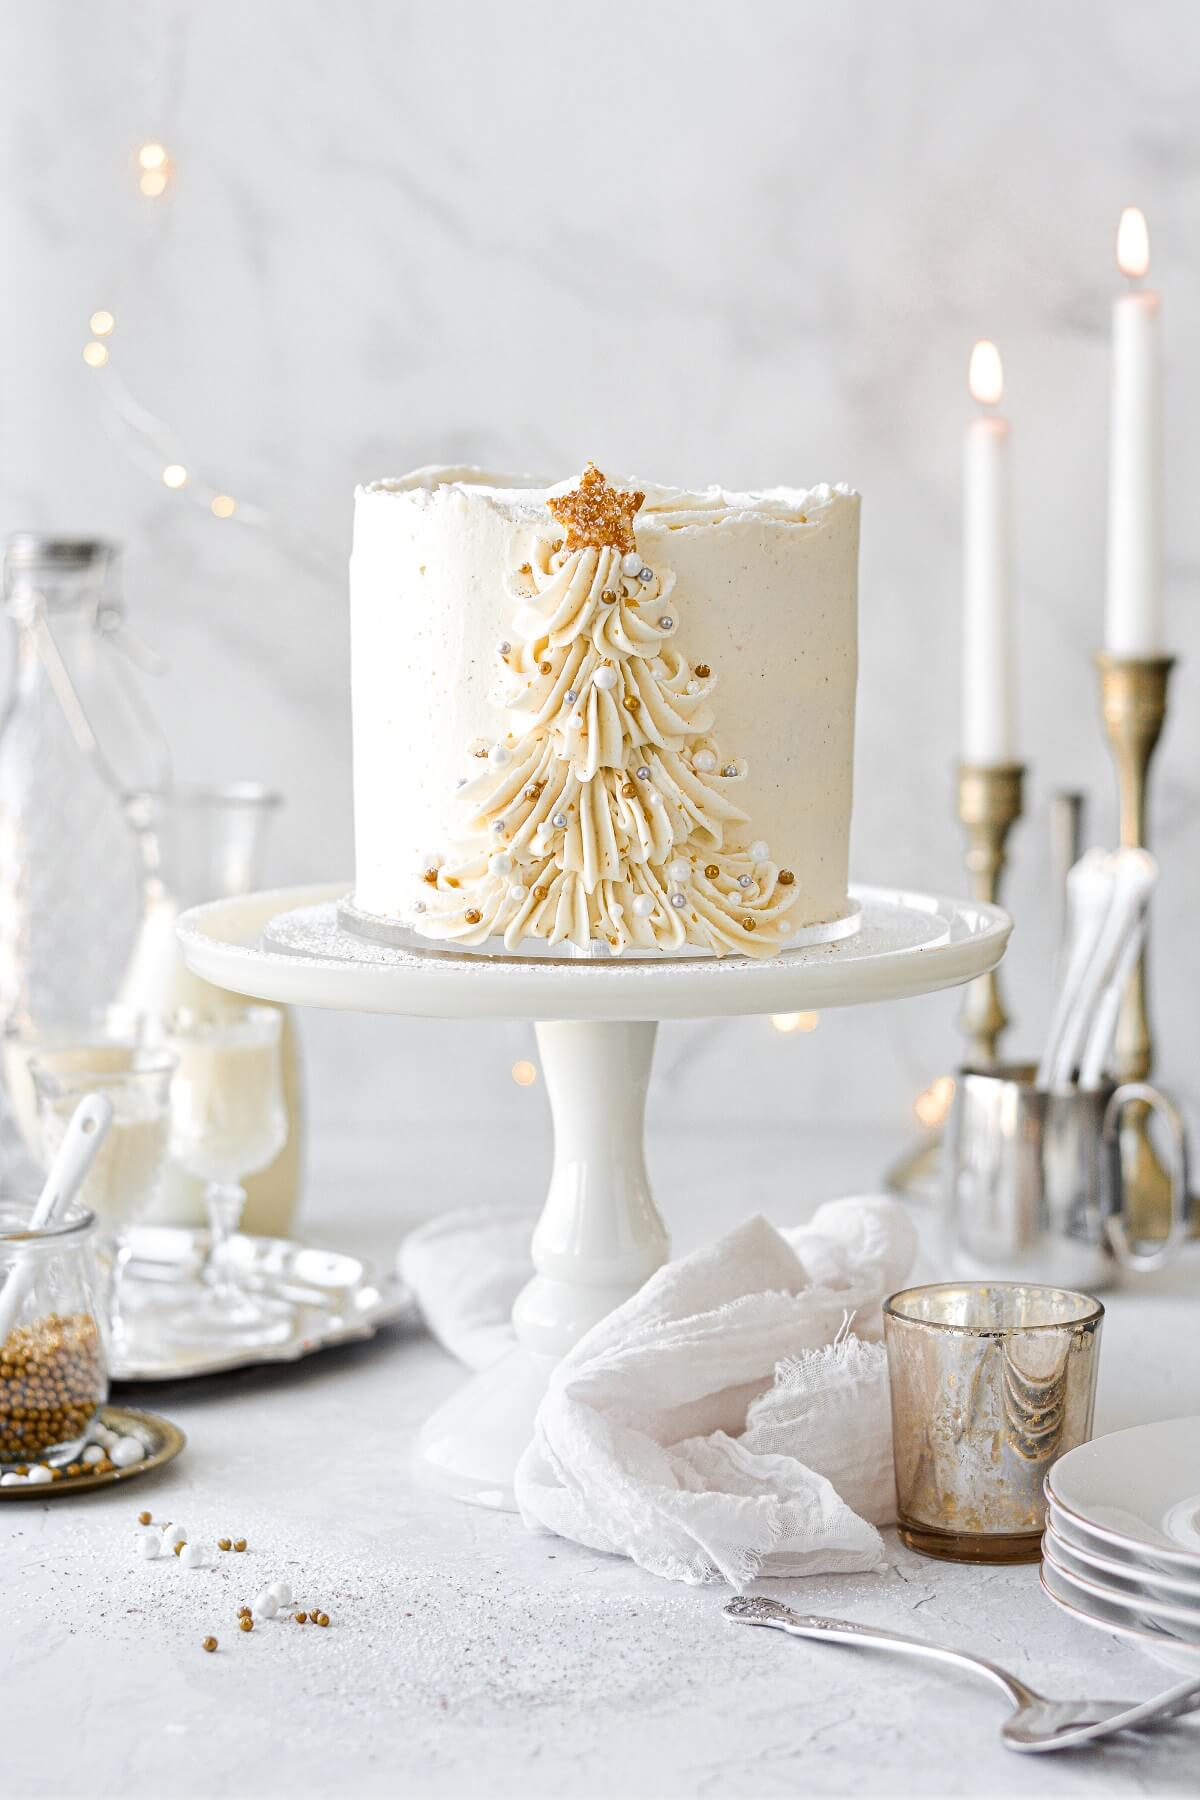 Eggnog cake with a buttercream Christmas tree piped up the side.